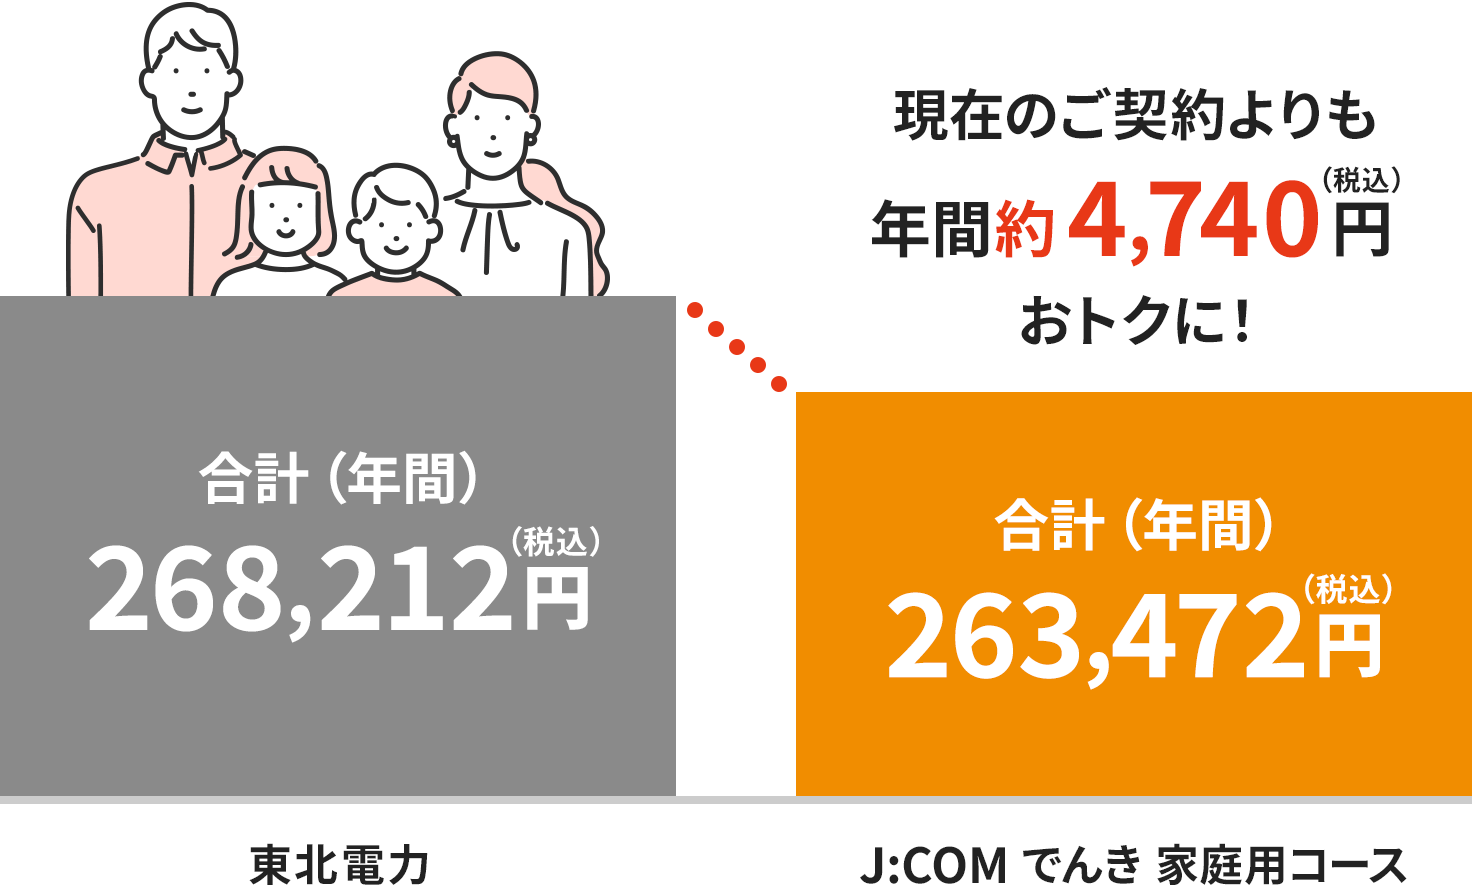 Image of charges in the Tohoku Electric Power area (for a four-person household)